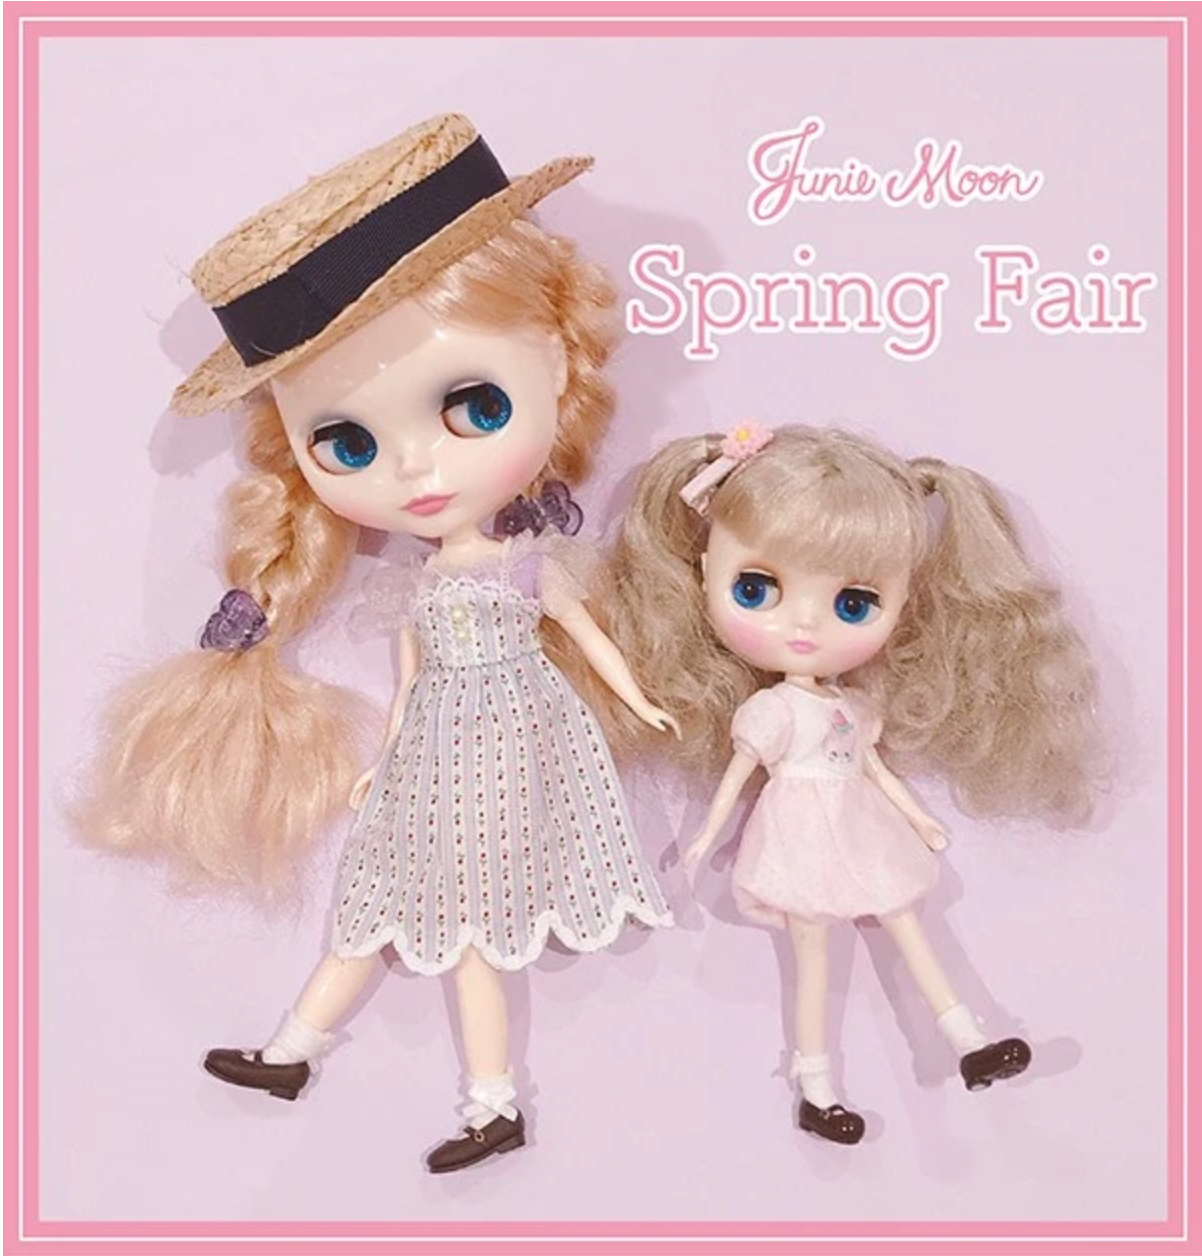 Spring Fair starts March 1 including discounts and exclusive sets!